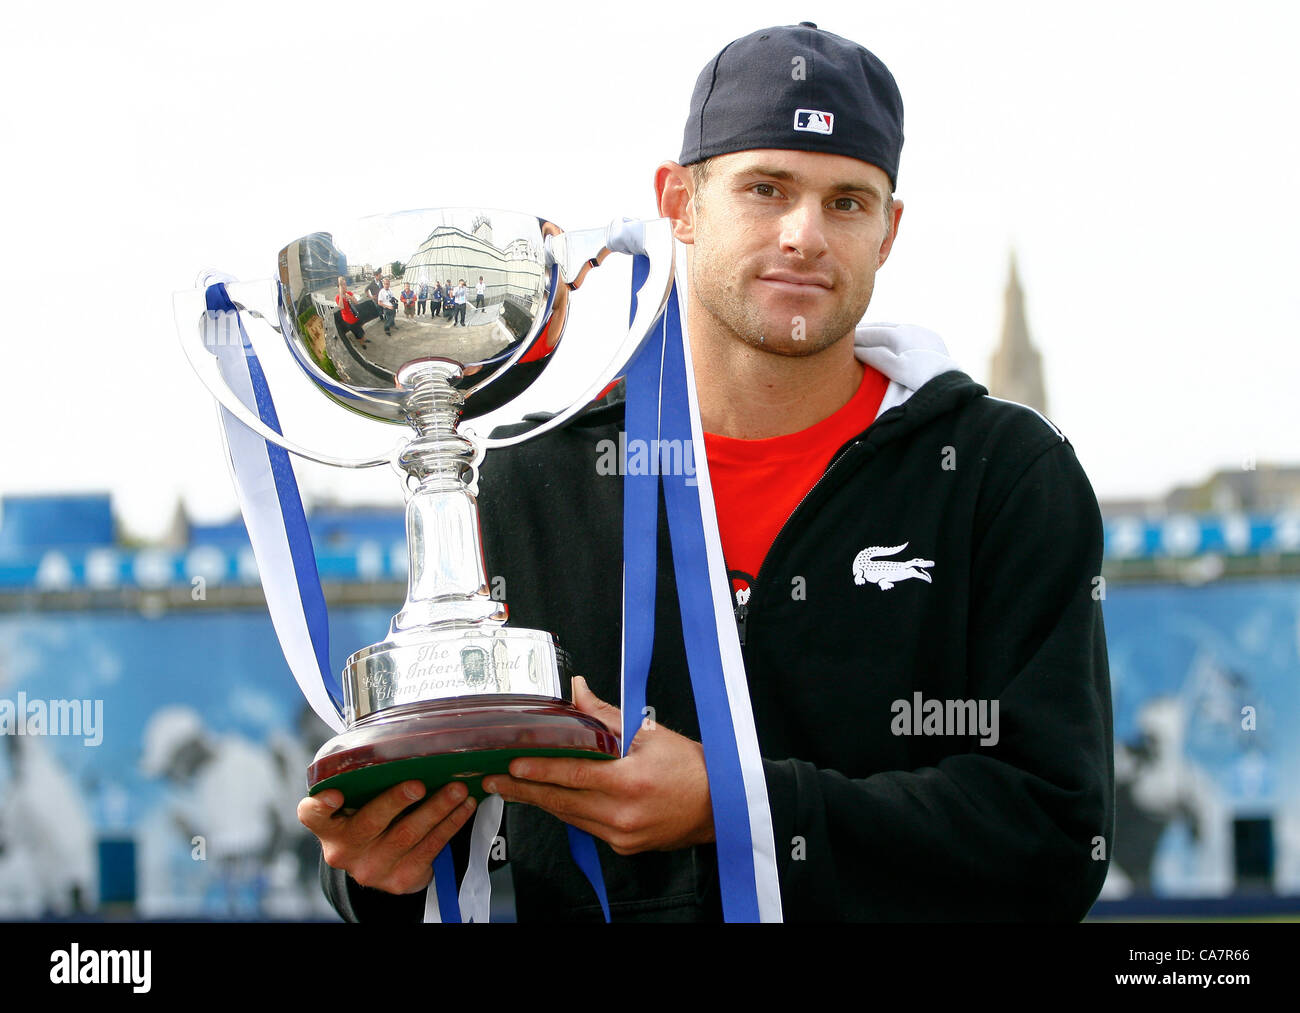 23.06.12 Devonshire Park, Eastbourne, ENGLAND: Andy Roddick (USA) with his ATP Tour title trophy at the AEGON INTERNATIONAL tournament in Eastbourne June 23 2012 Stock Photo